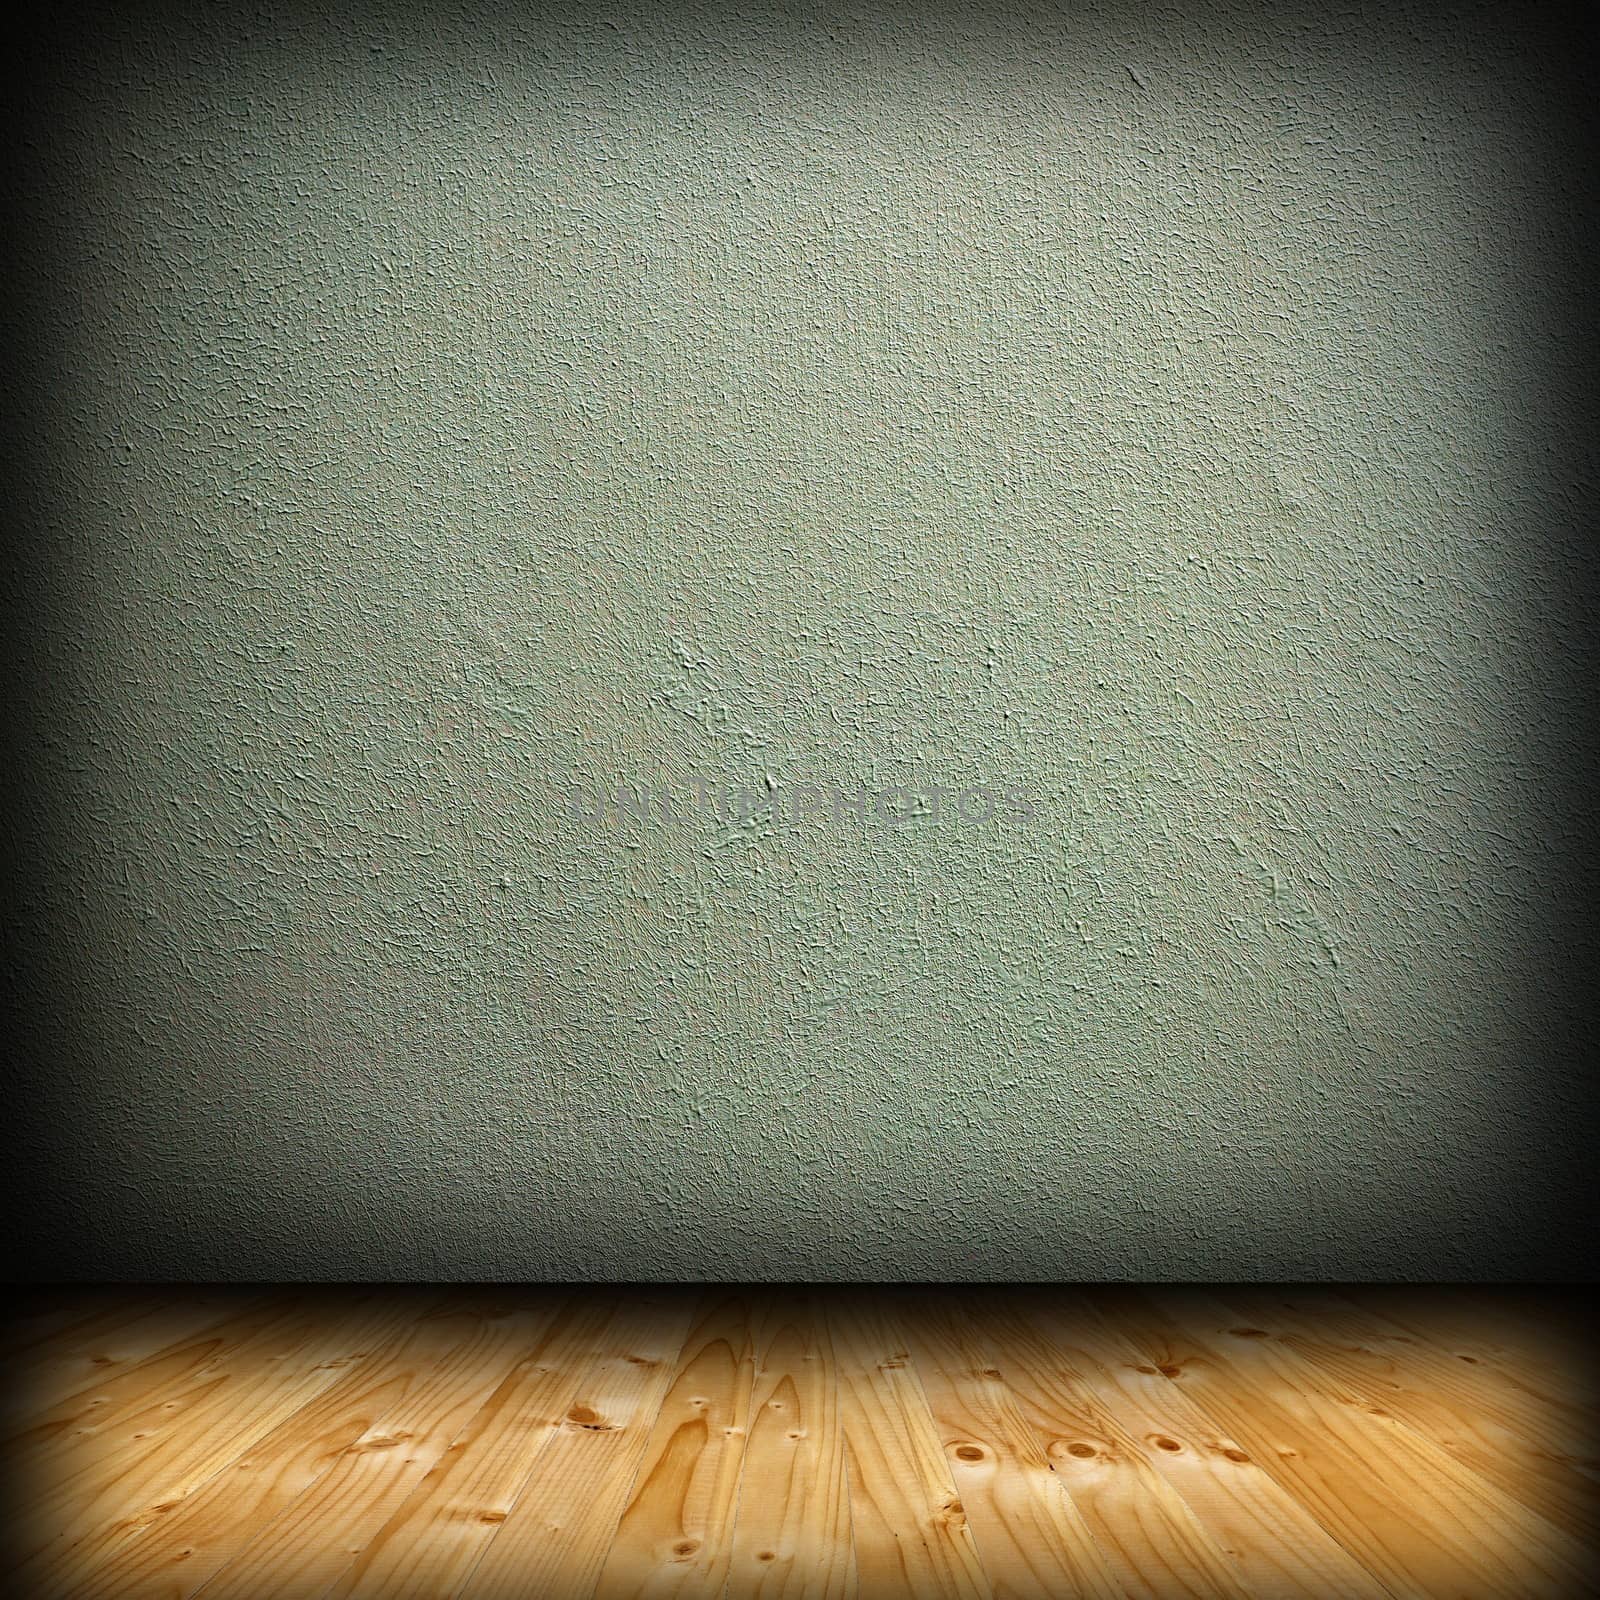 wood floor and green plaster by taviphoto